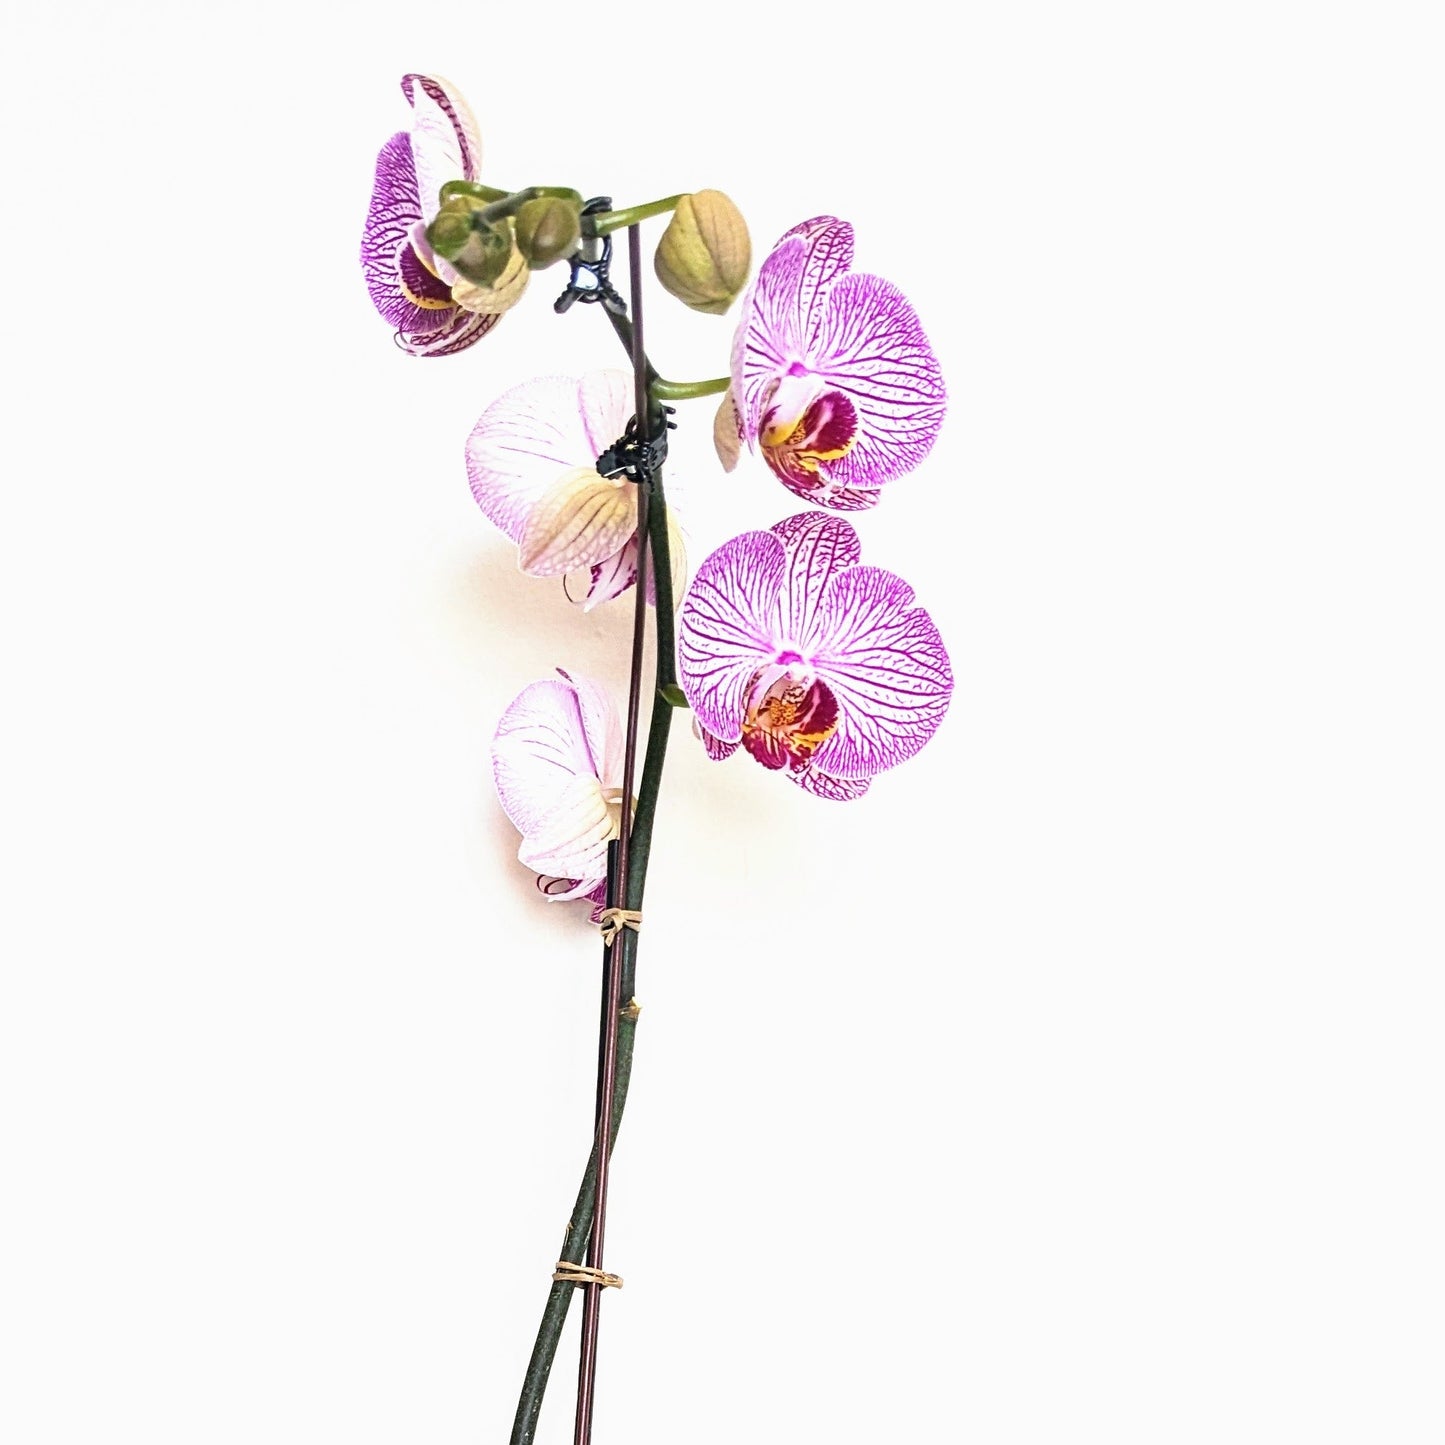 Purple Swirl Phalaenopsis Orchid - Plants - Queens Flower Delivery